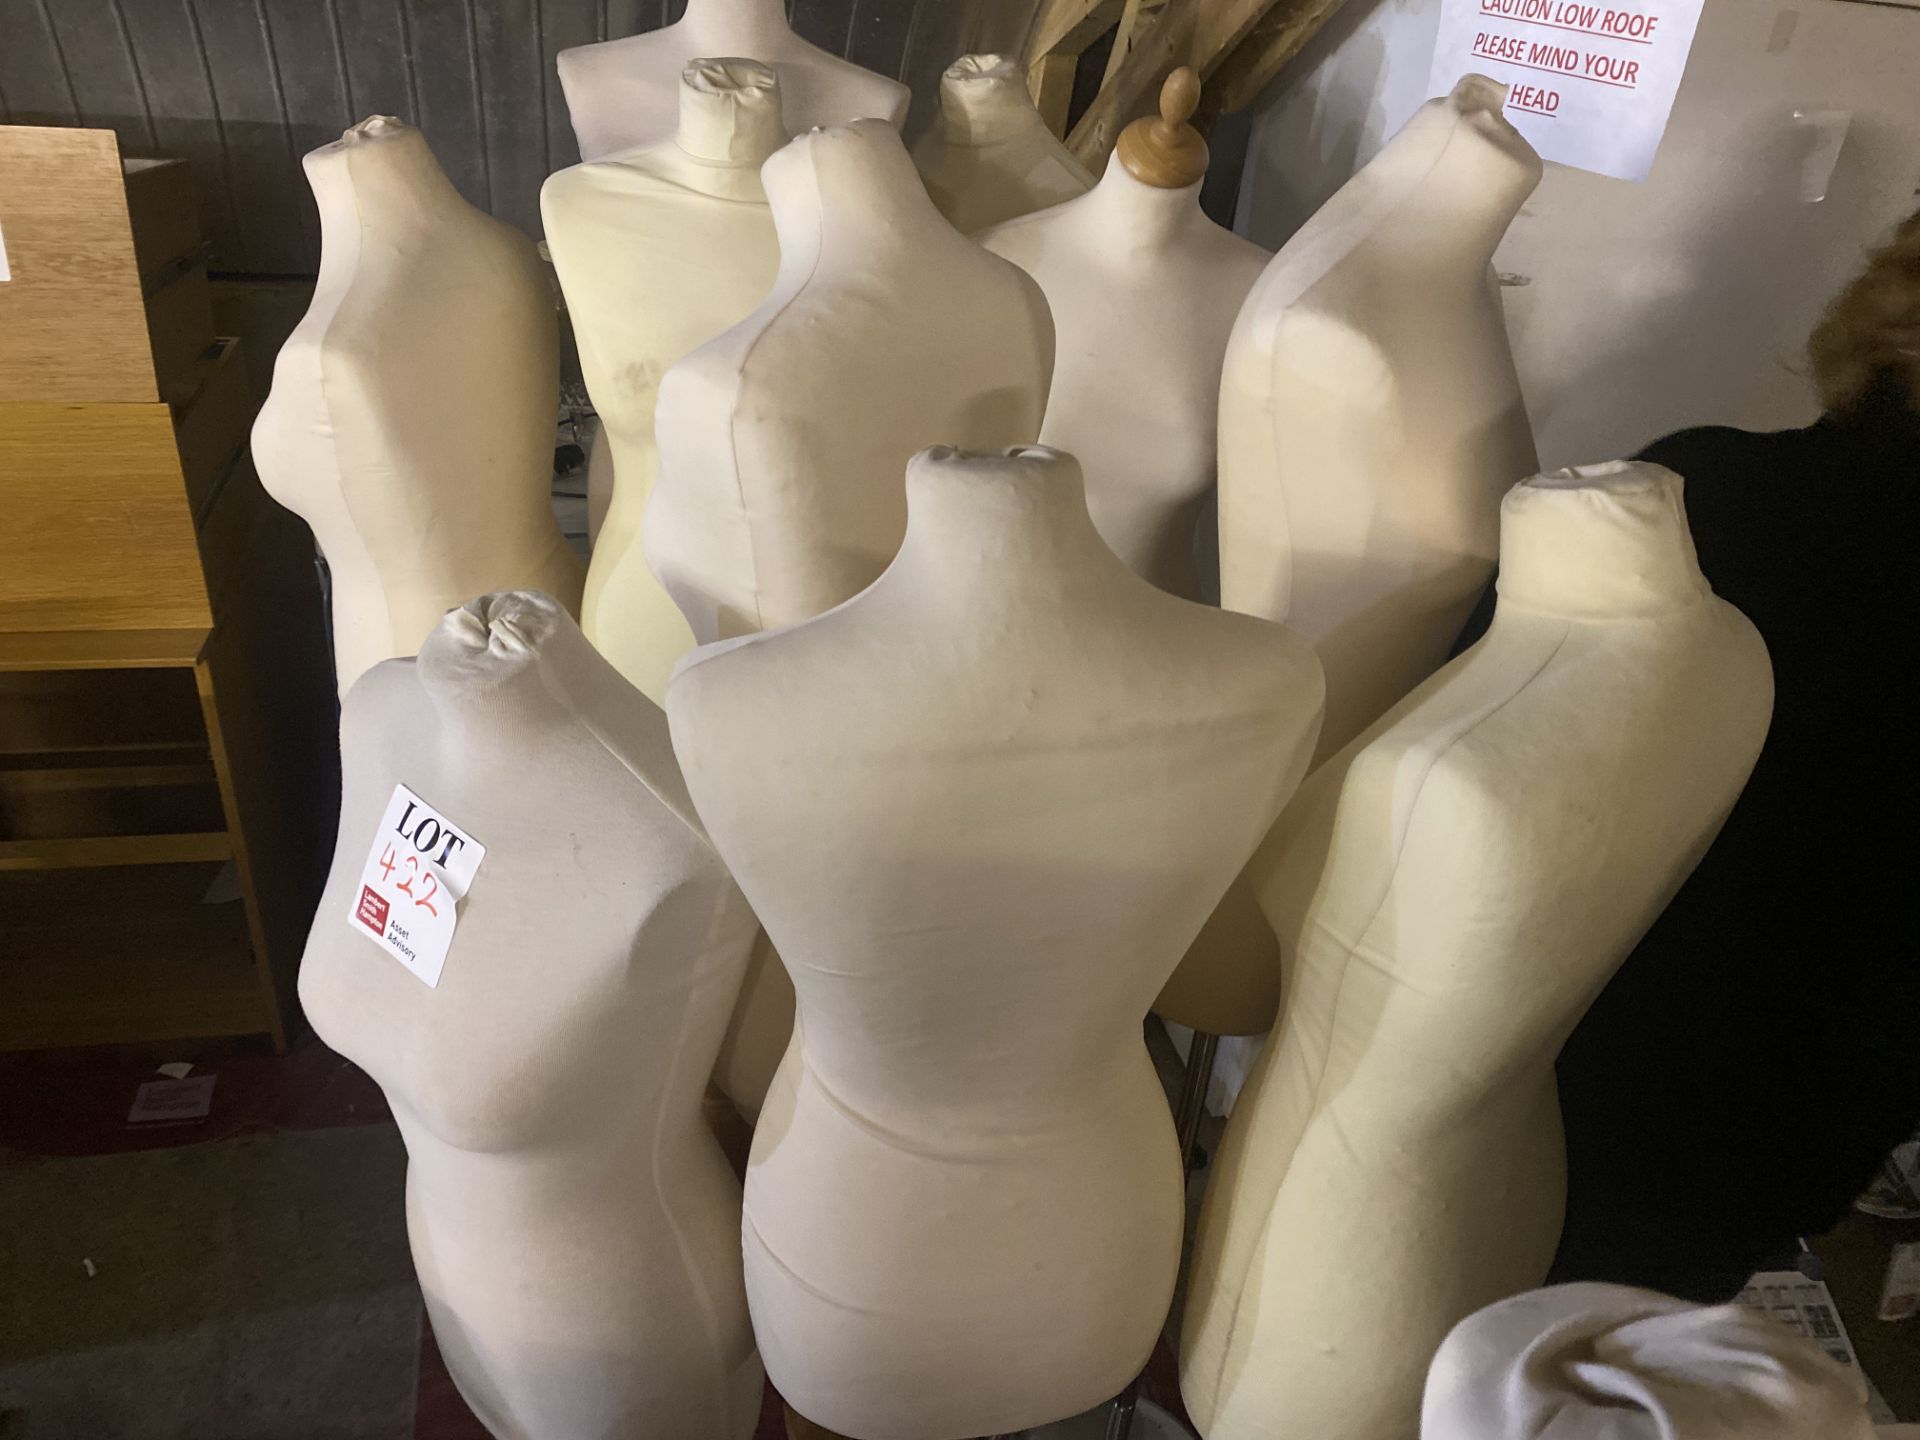 Fifteen Body of Bridal mannequins